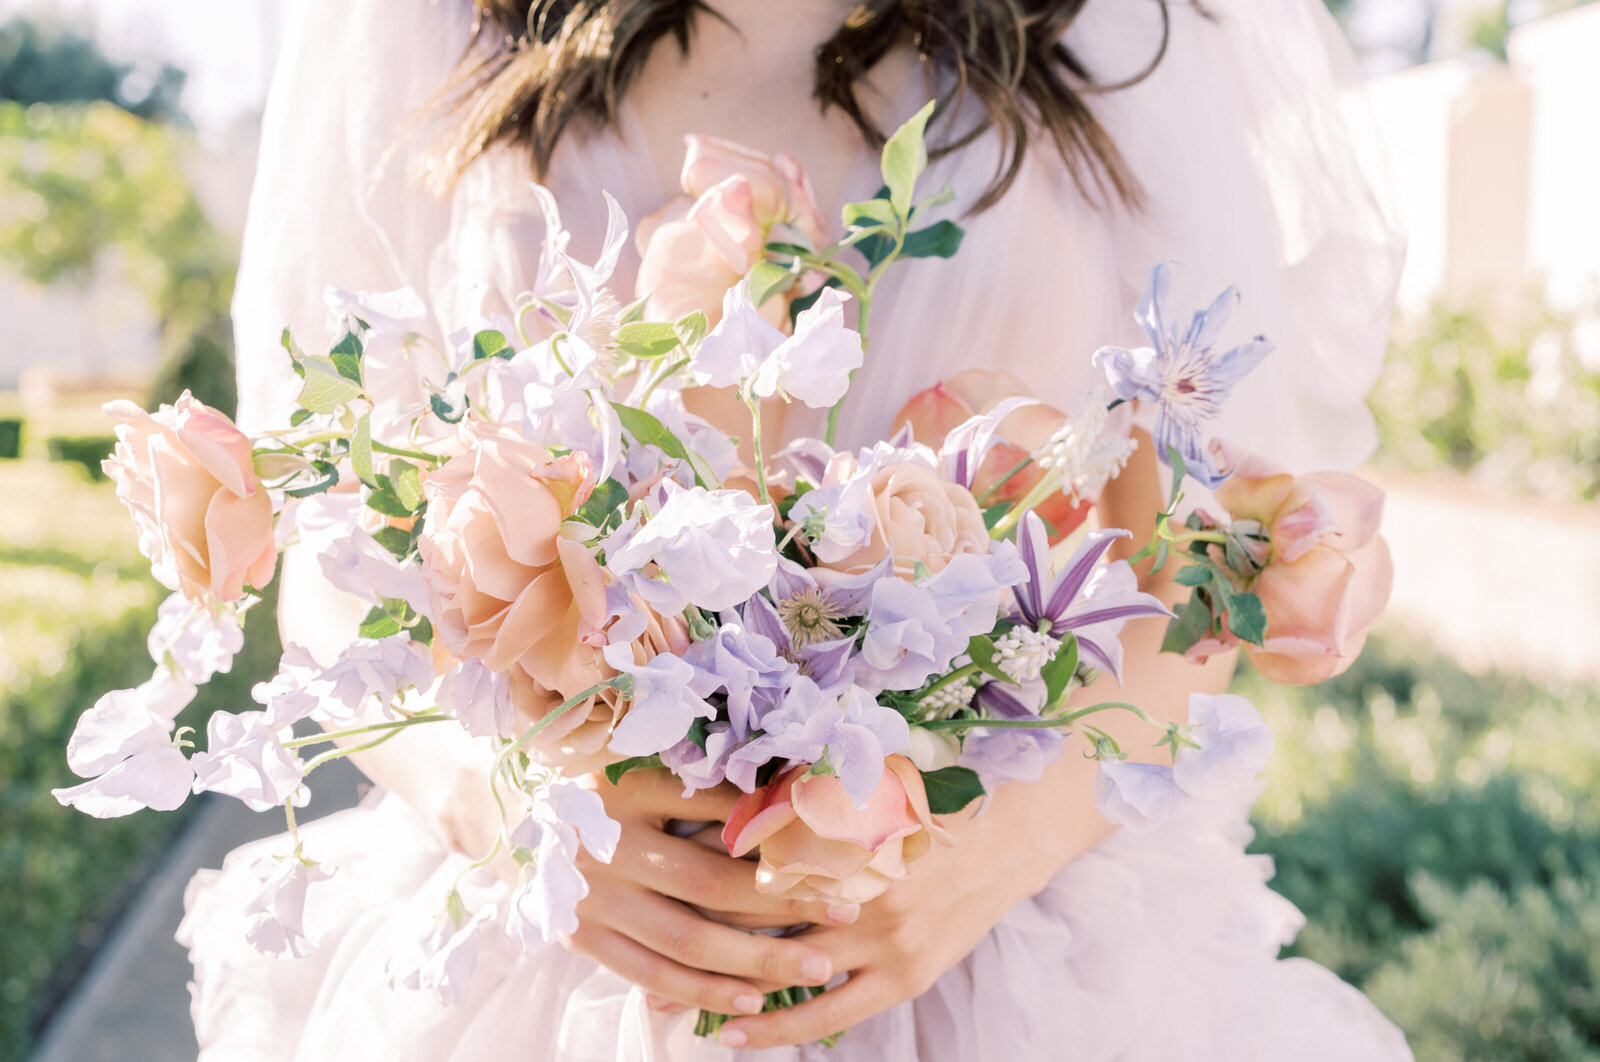 Portrait of a bride in a lavender wedding gown holding a bouquet of lavender and peach flowers.